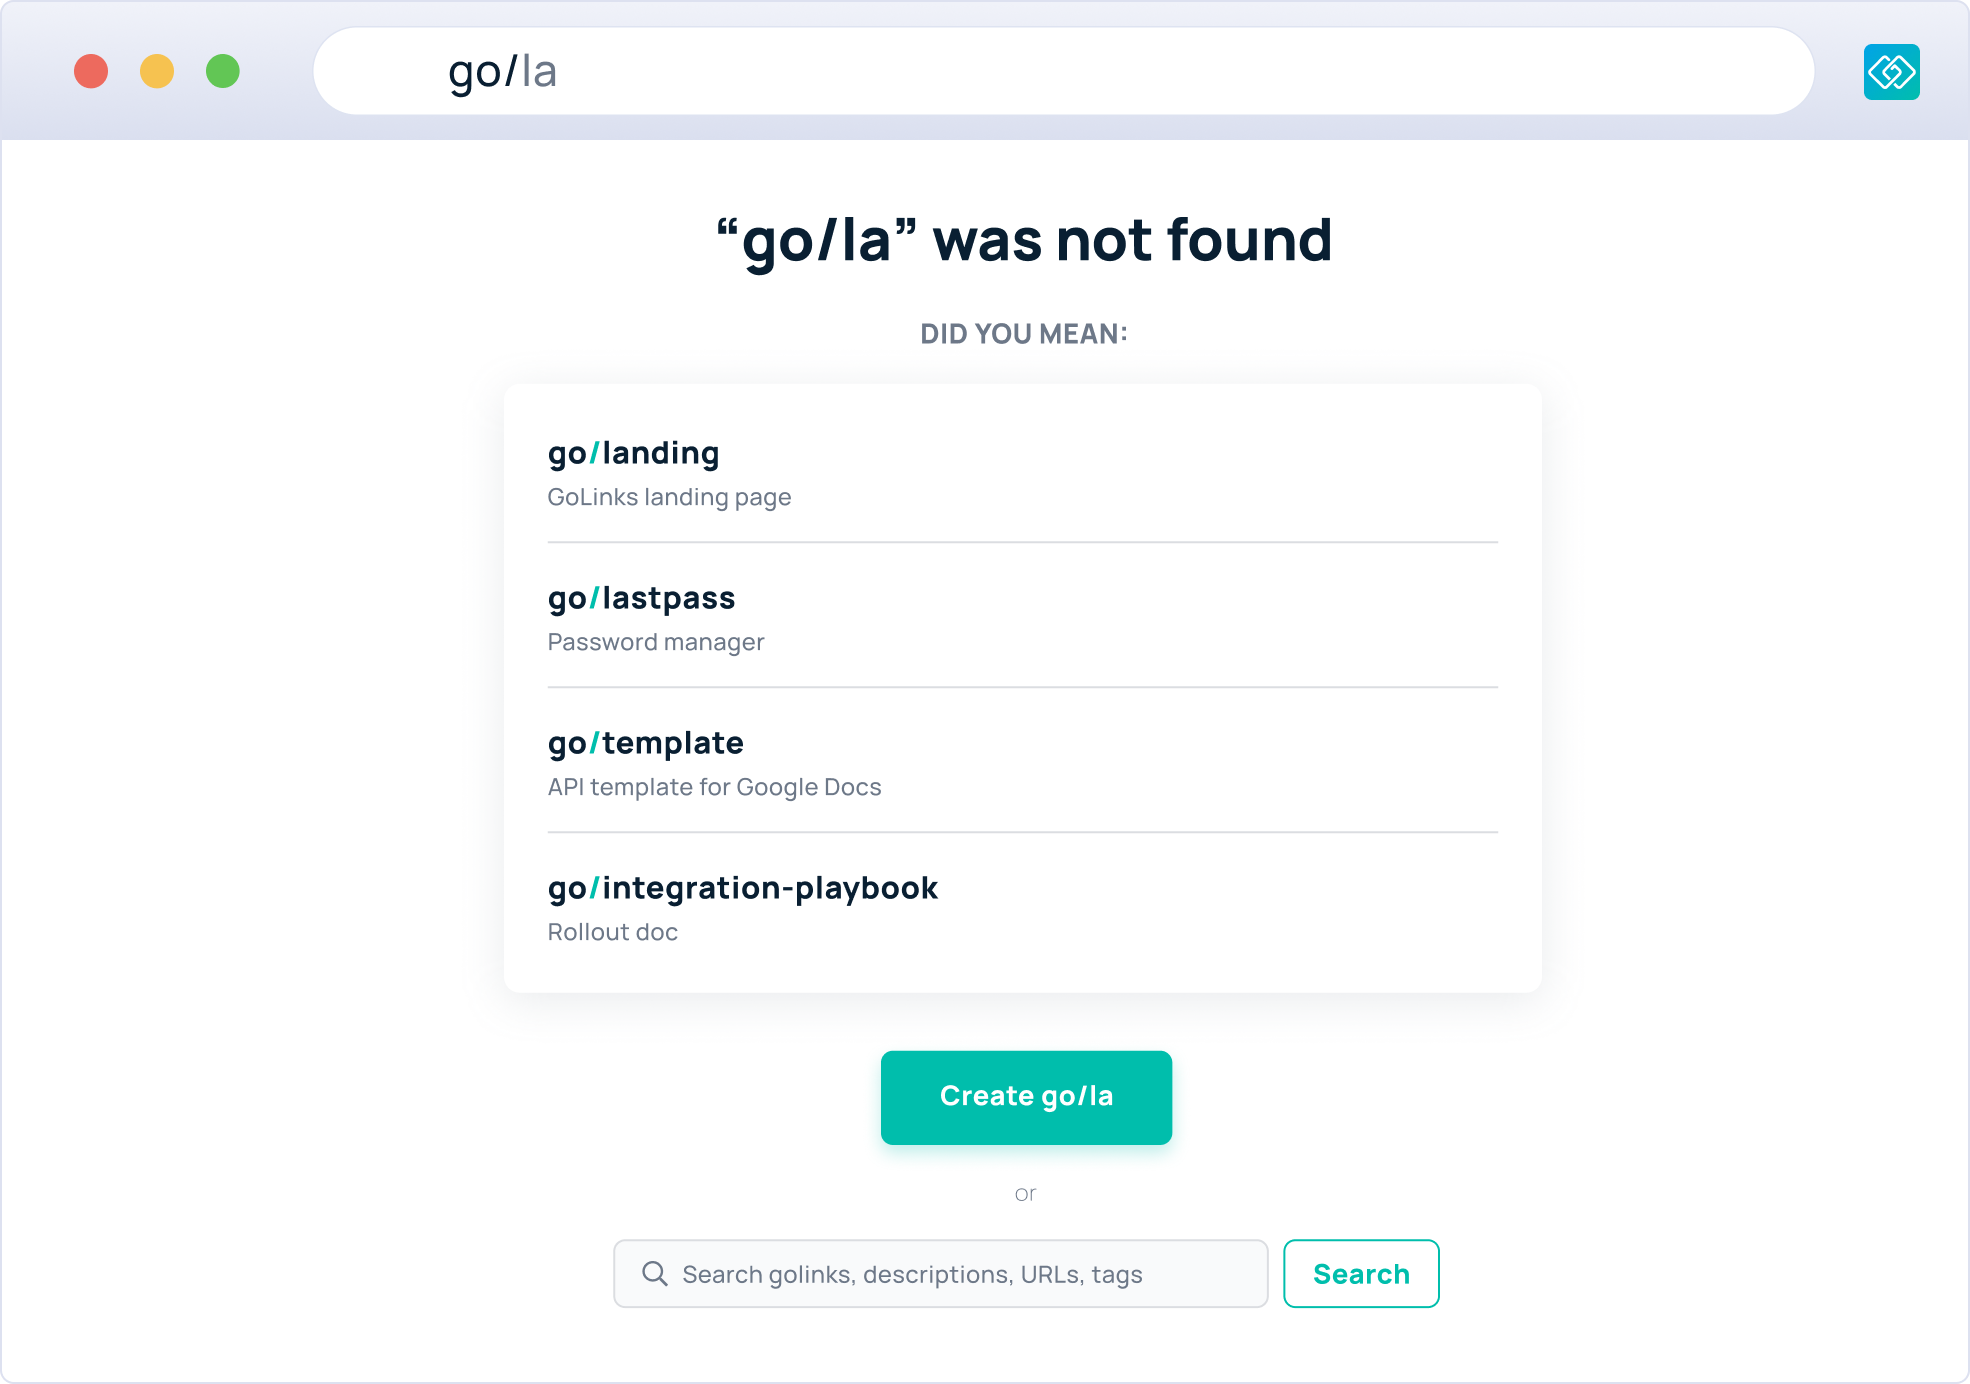 List of results when hitting GoLinks not found page